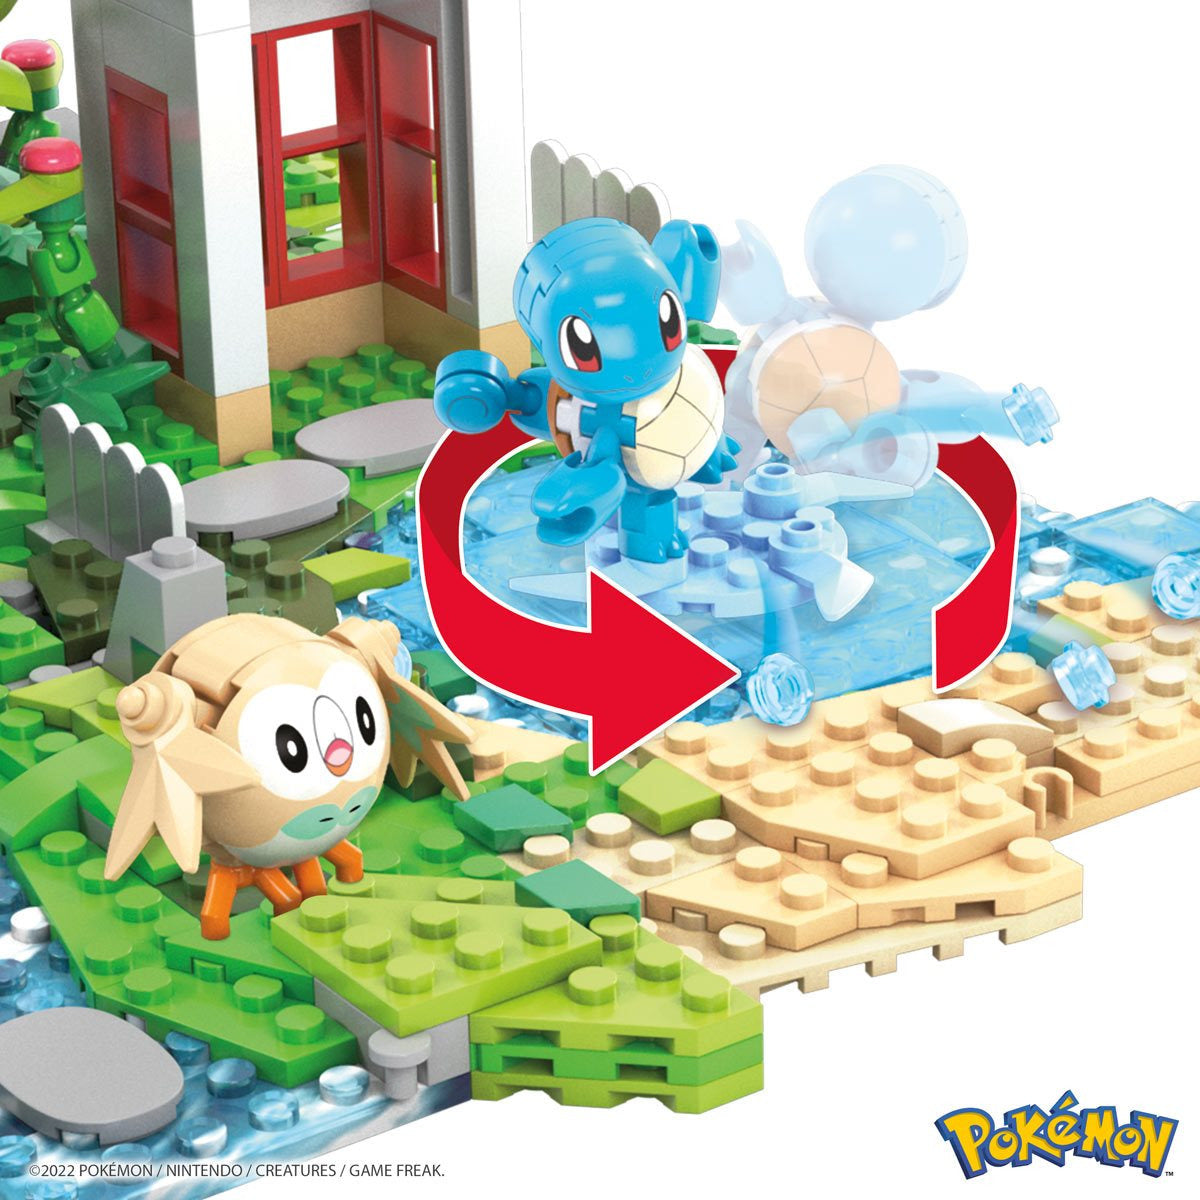 Pokemon Best Nature Piplup, Collection Model Toys